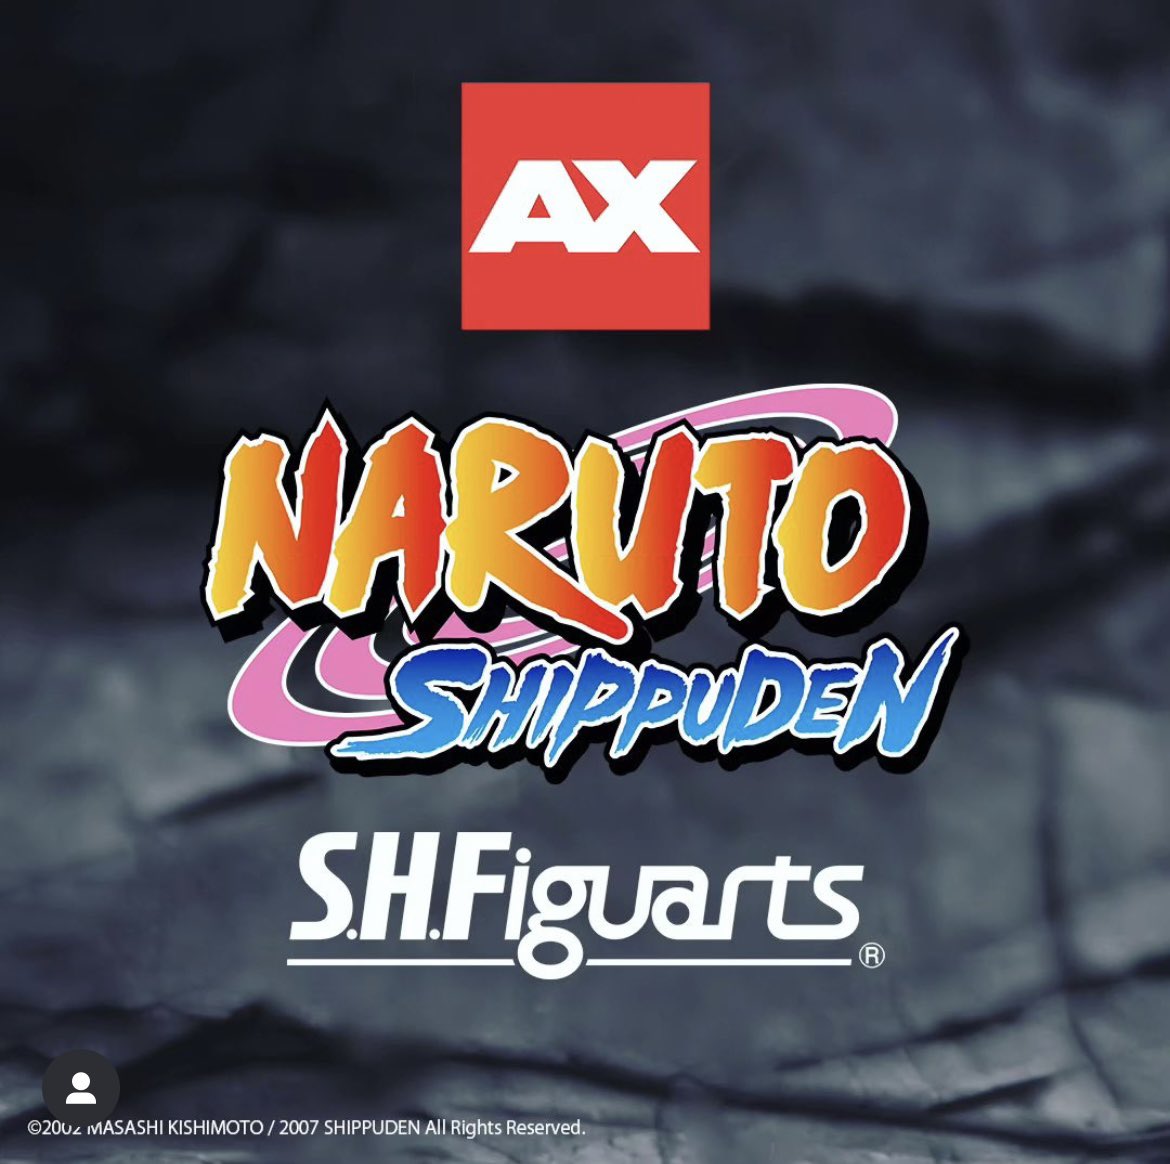 The new Naruto announcement is mystifying - Smartprix